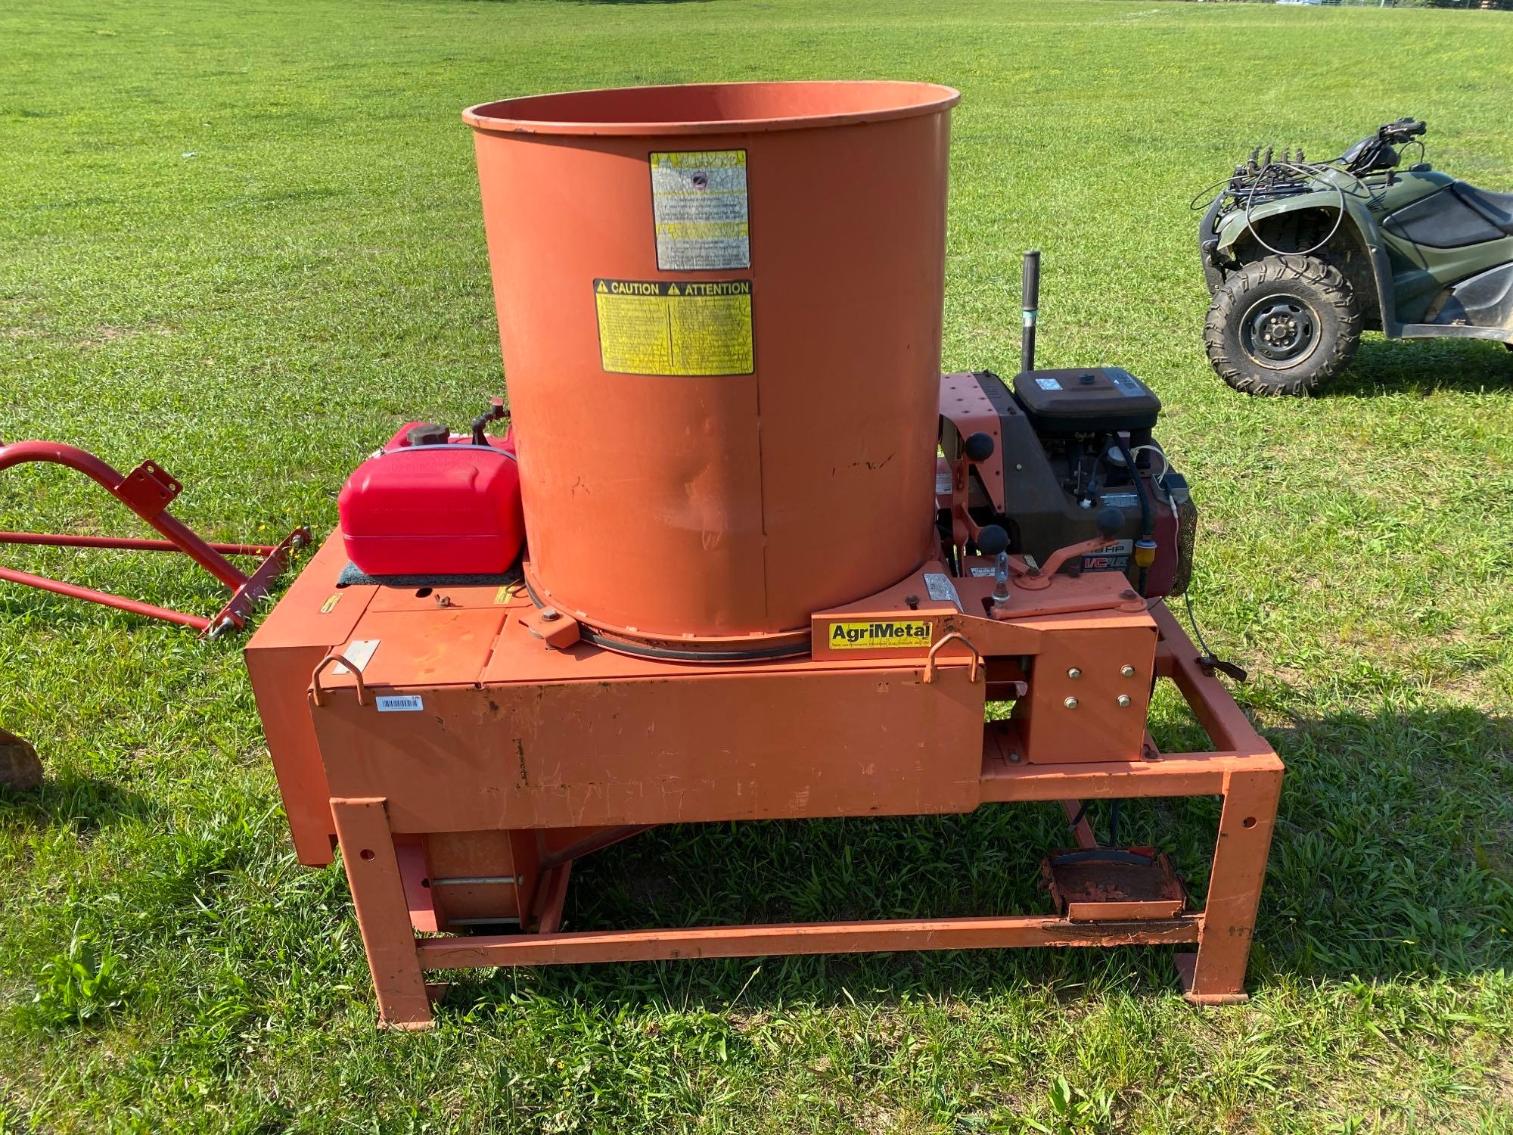 Image for Agri Metal Straw Blower/Bale Chopper Per Seller Ran when last used may need battery